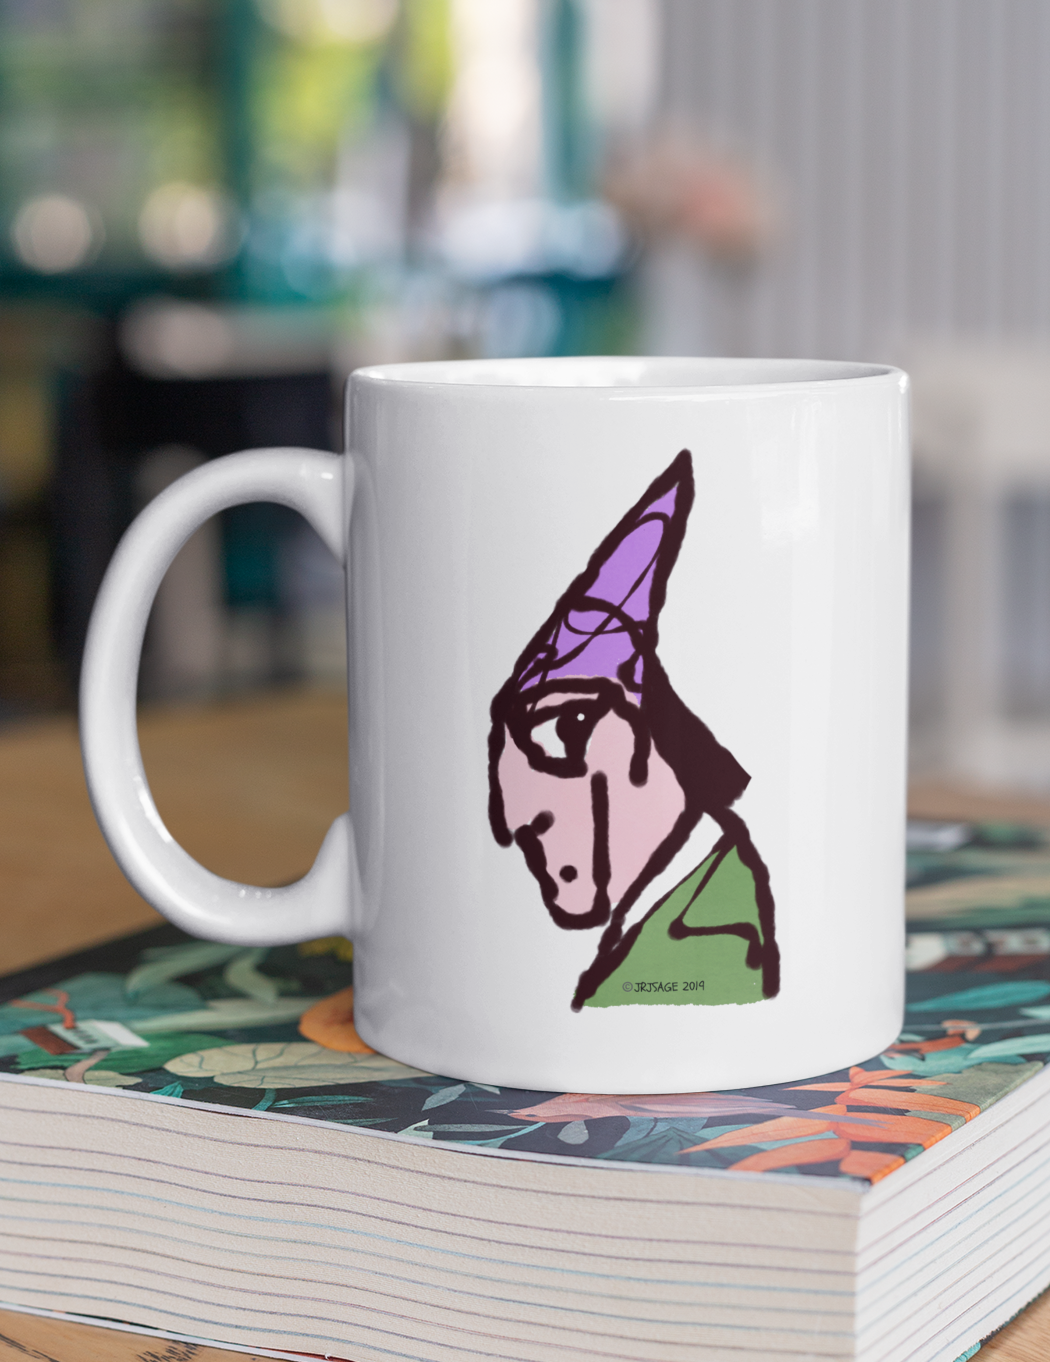 Wizard coffee mug - Illustrated magicial wizard design on a mug by Hector and Bone on a table